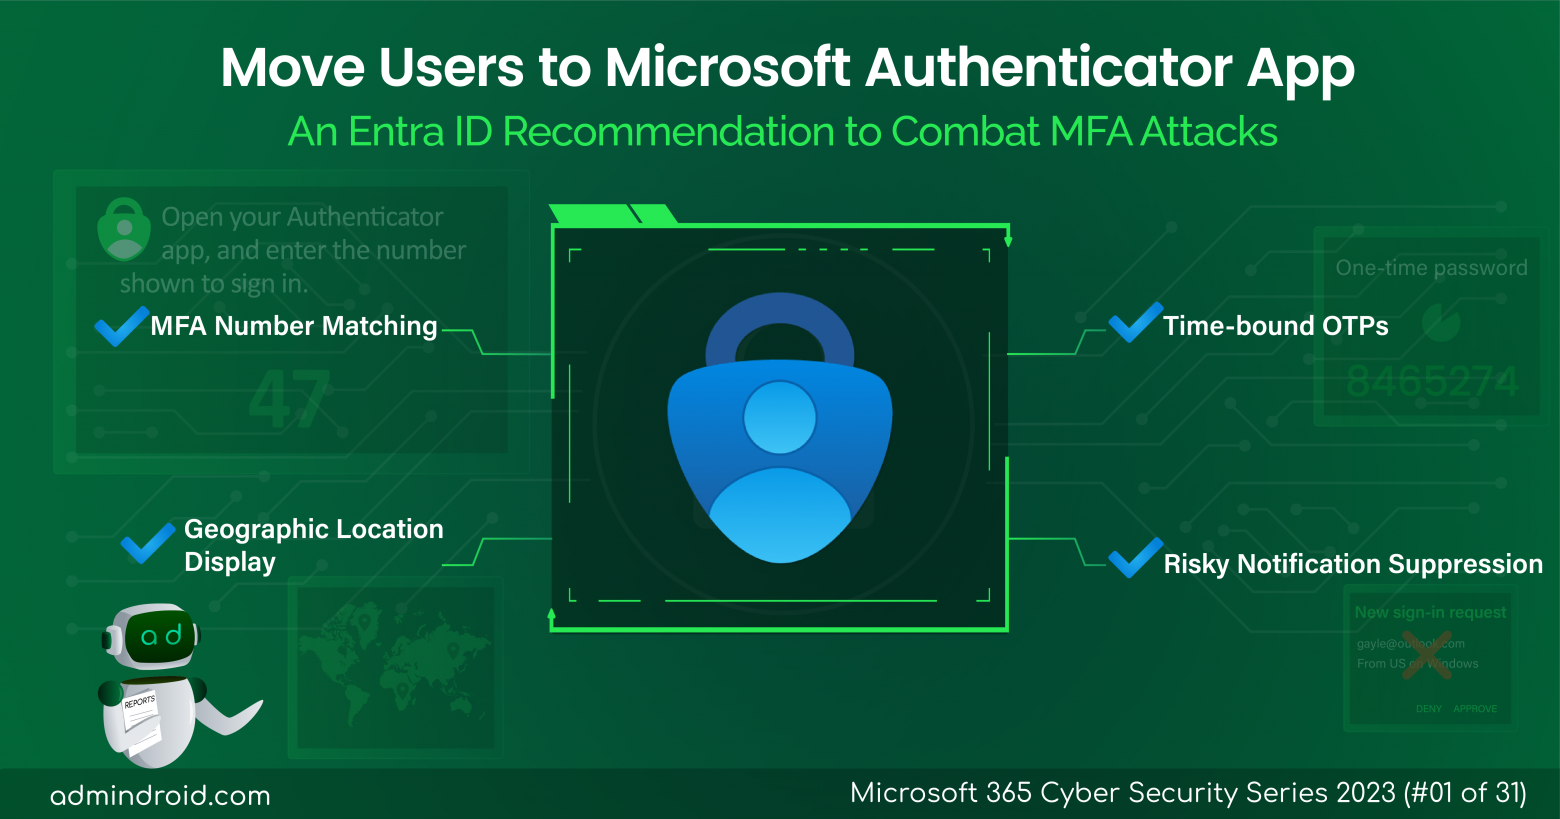 Move Users to Microsoft Authenticator App – An Entra ID Recommendation